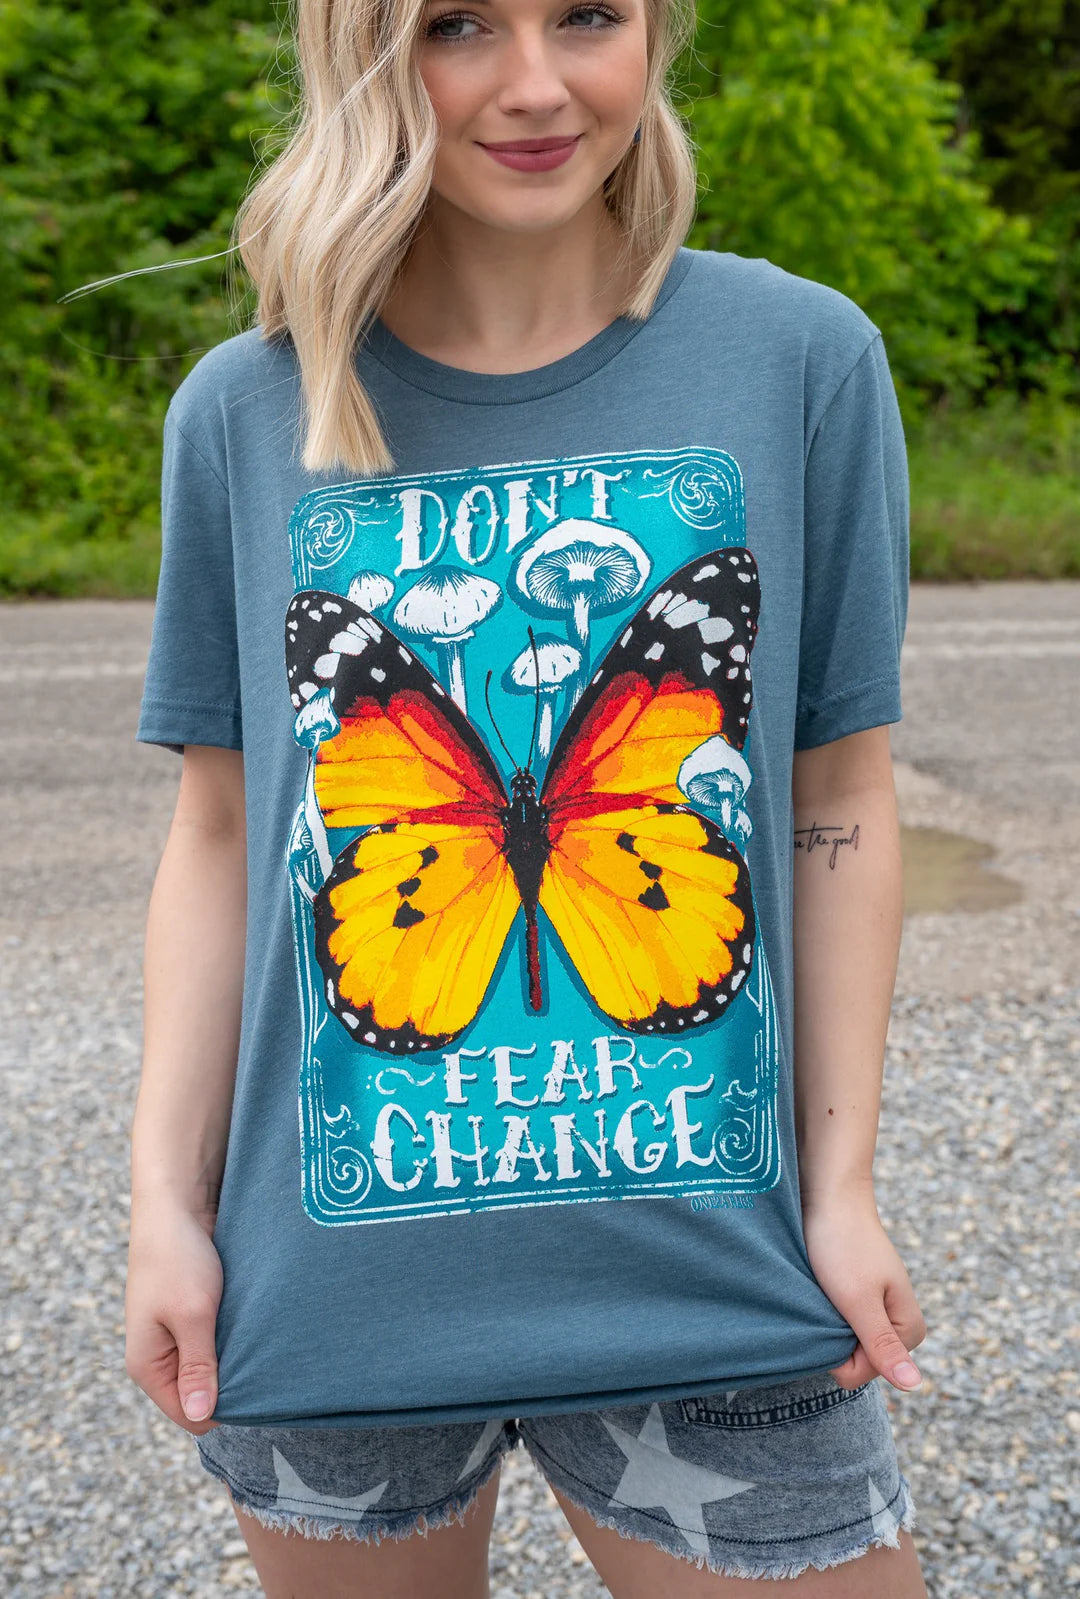 Don’t Fear Change Graphic Tee /Stuffology Boutique-Graphic Tees-One24 Rags-Stuffology - Where Vintage Meets Modern, A Boutique for Real Women in Crosbyton, TX